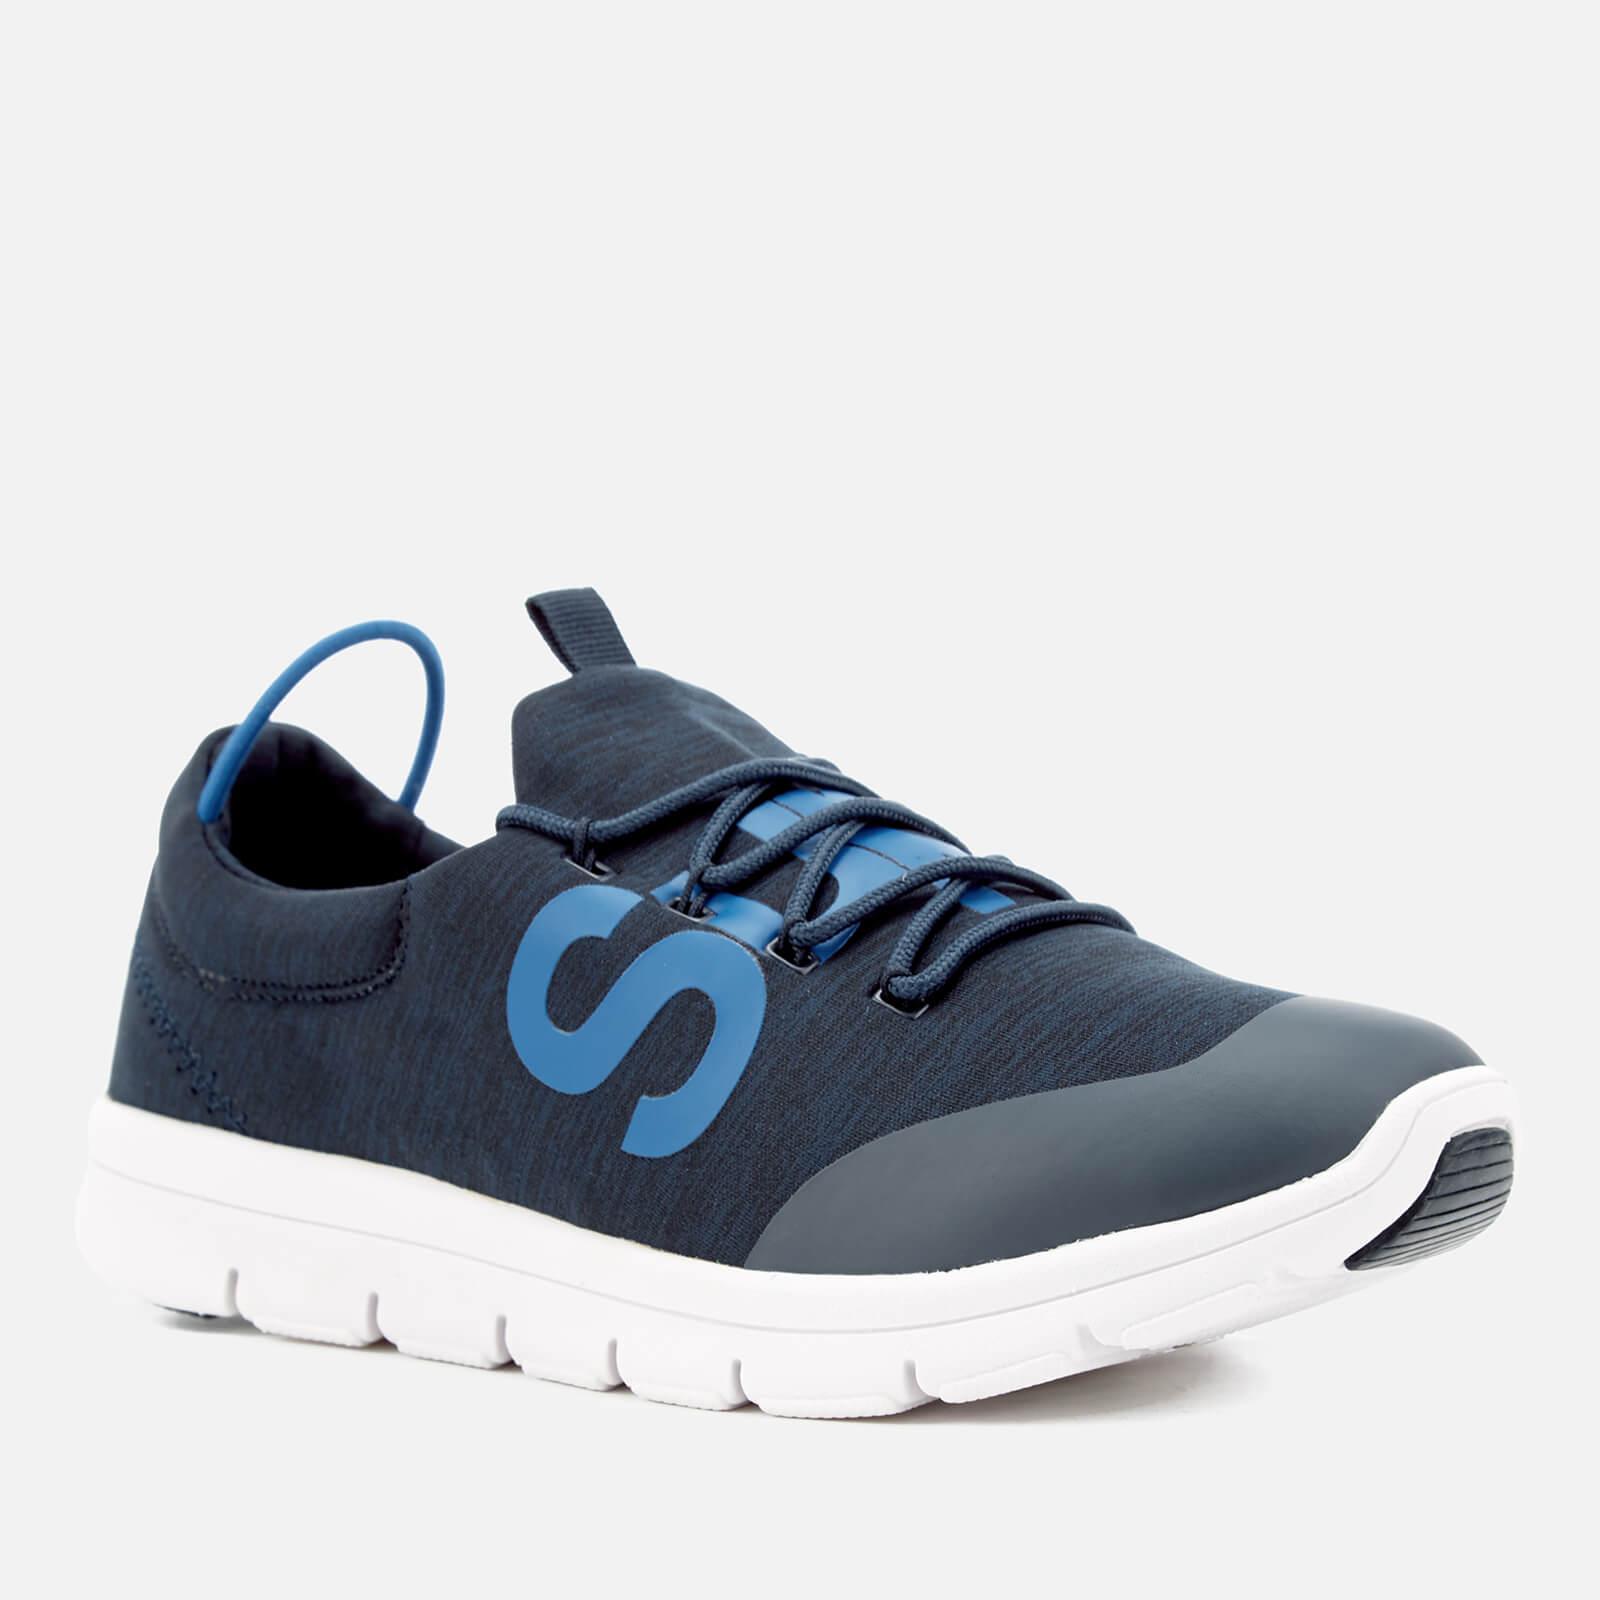 Superdry Lace Scuba Storm Runner Trainers in Blue for Men - Lyst